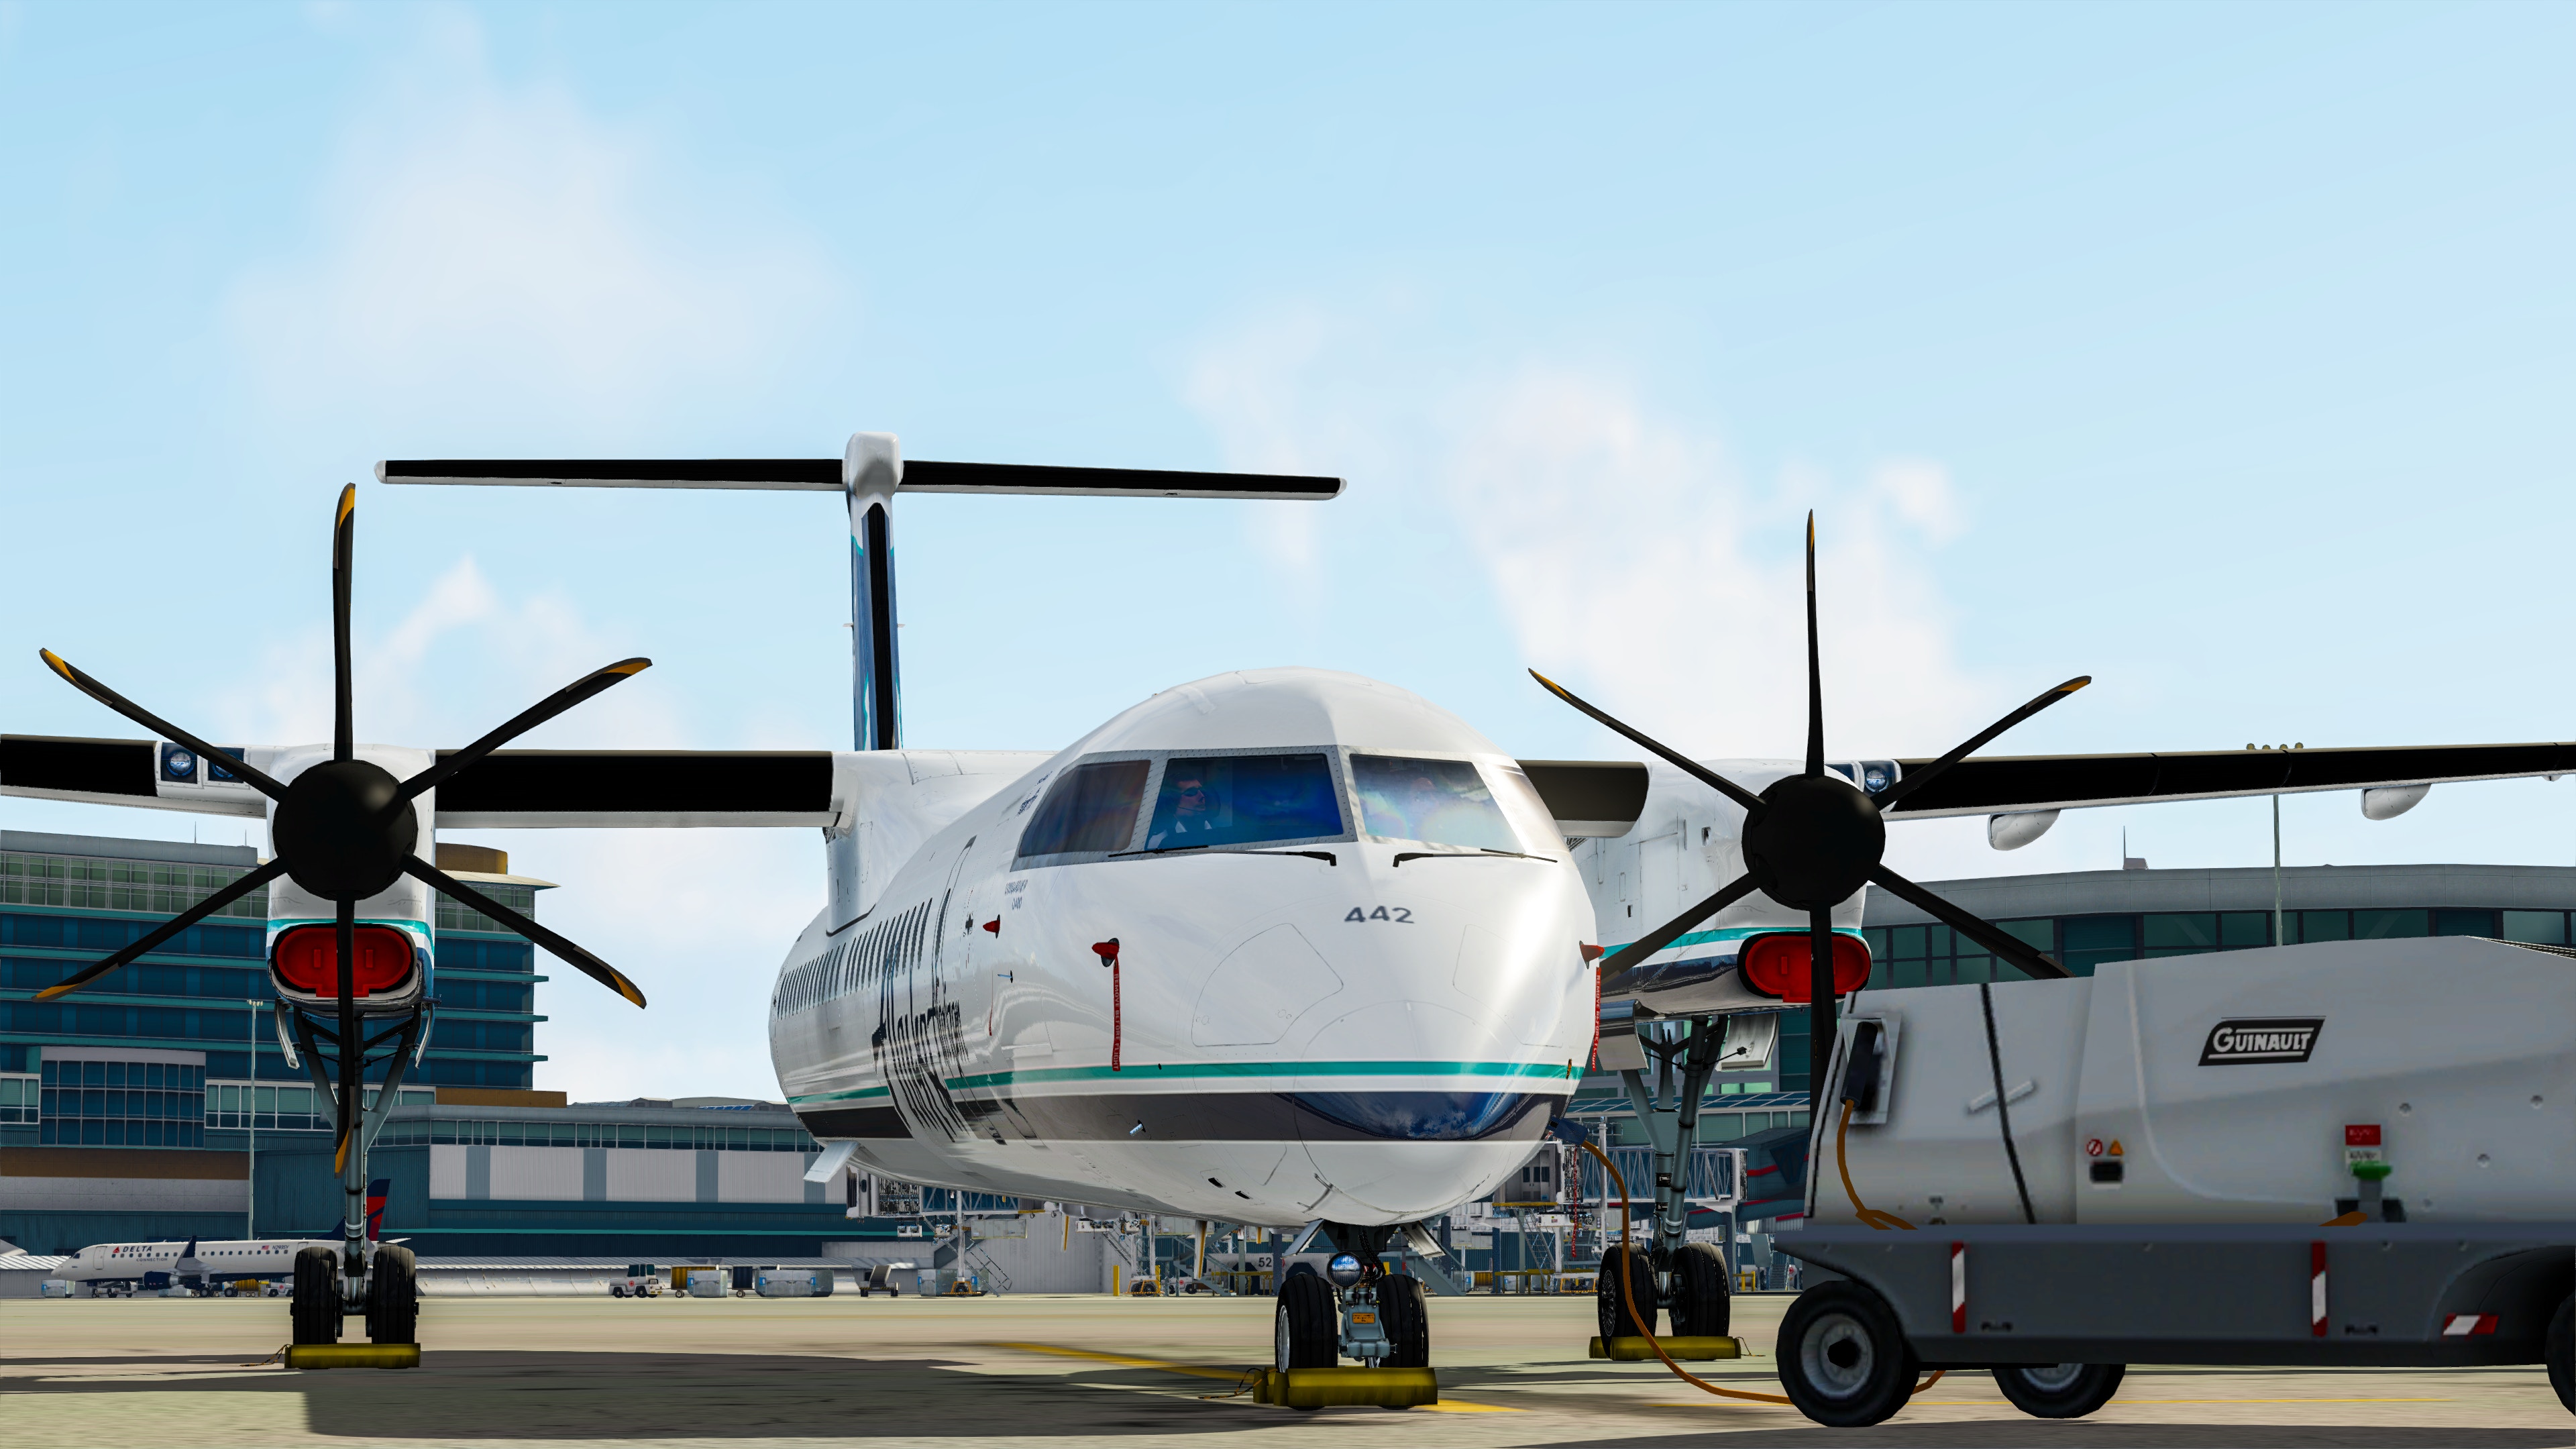 Majestic Software Confirms Q400 for MSFS